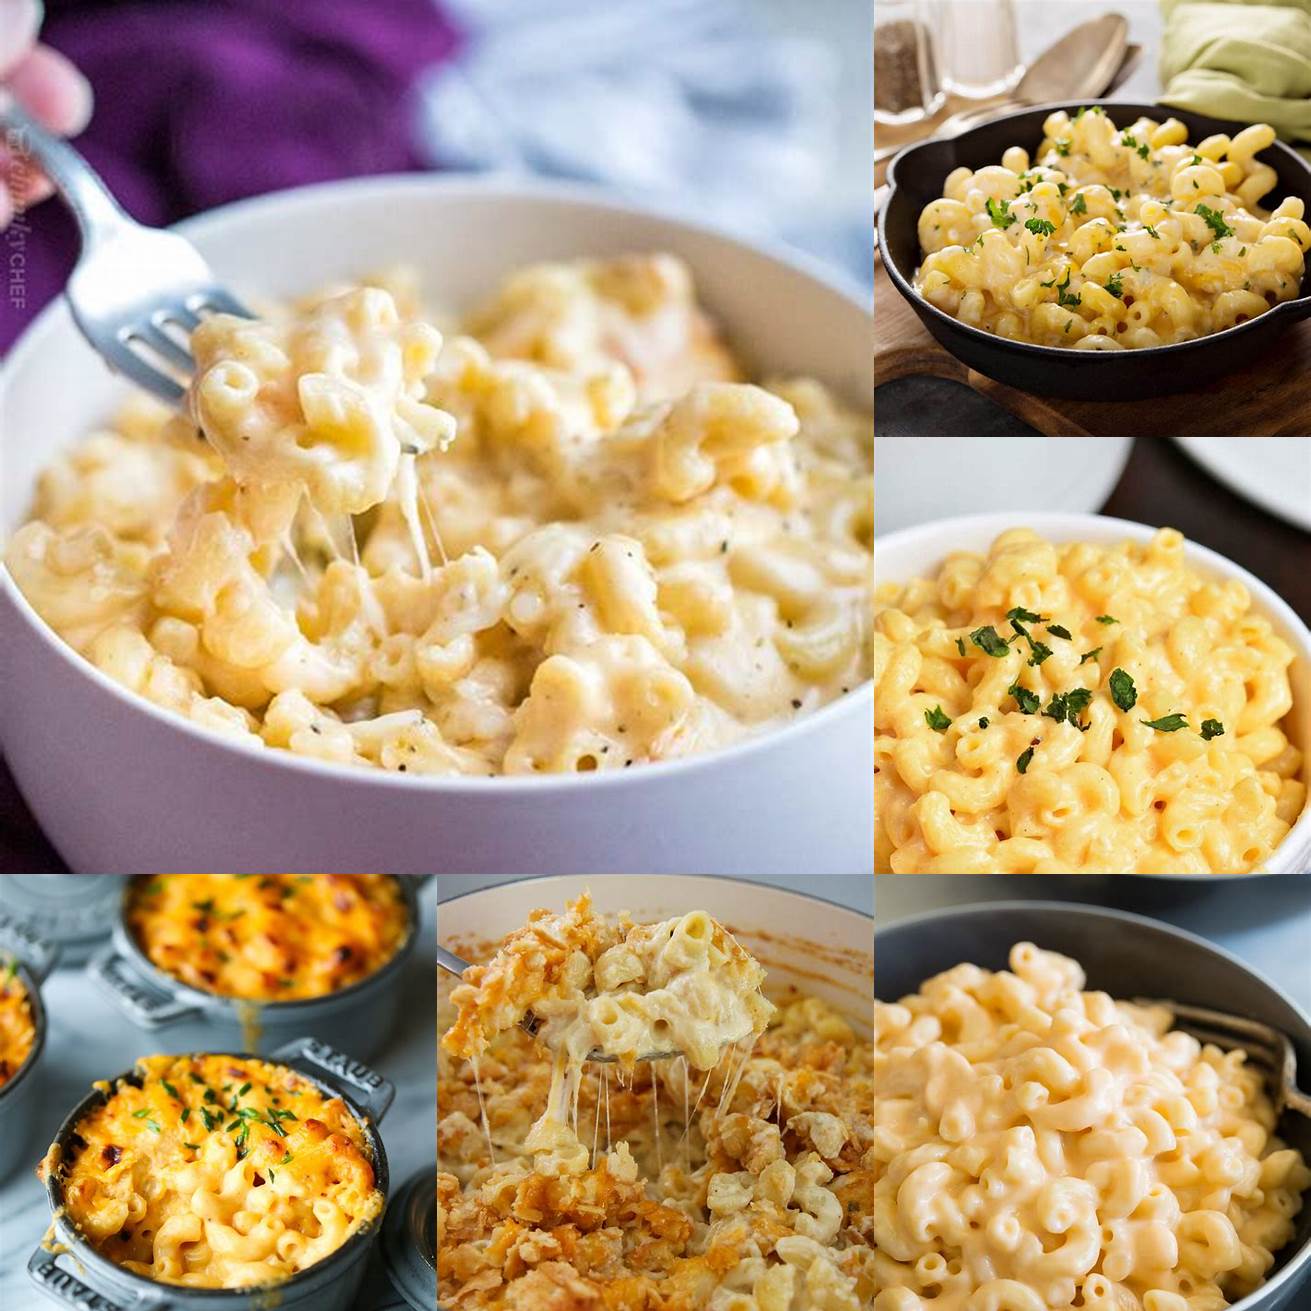 Mac and Cheese A cheesy comforting dish mac and cheese is made with pasta and a creamy cheese sauce